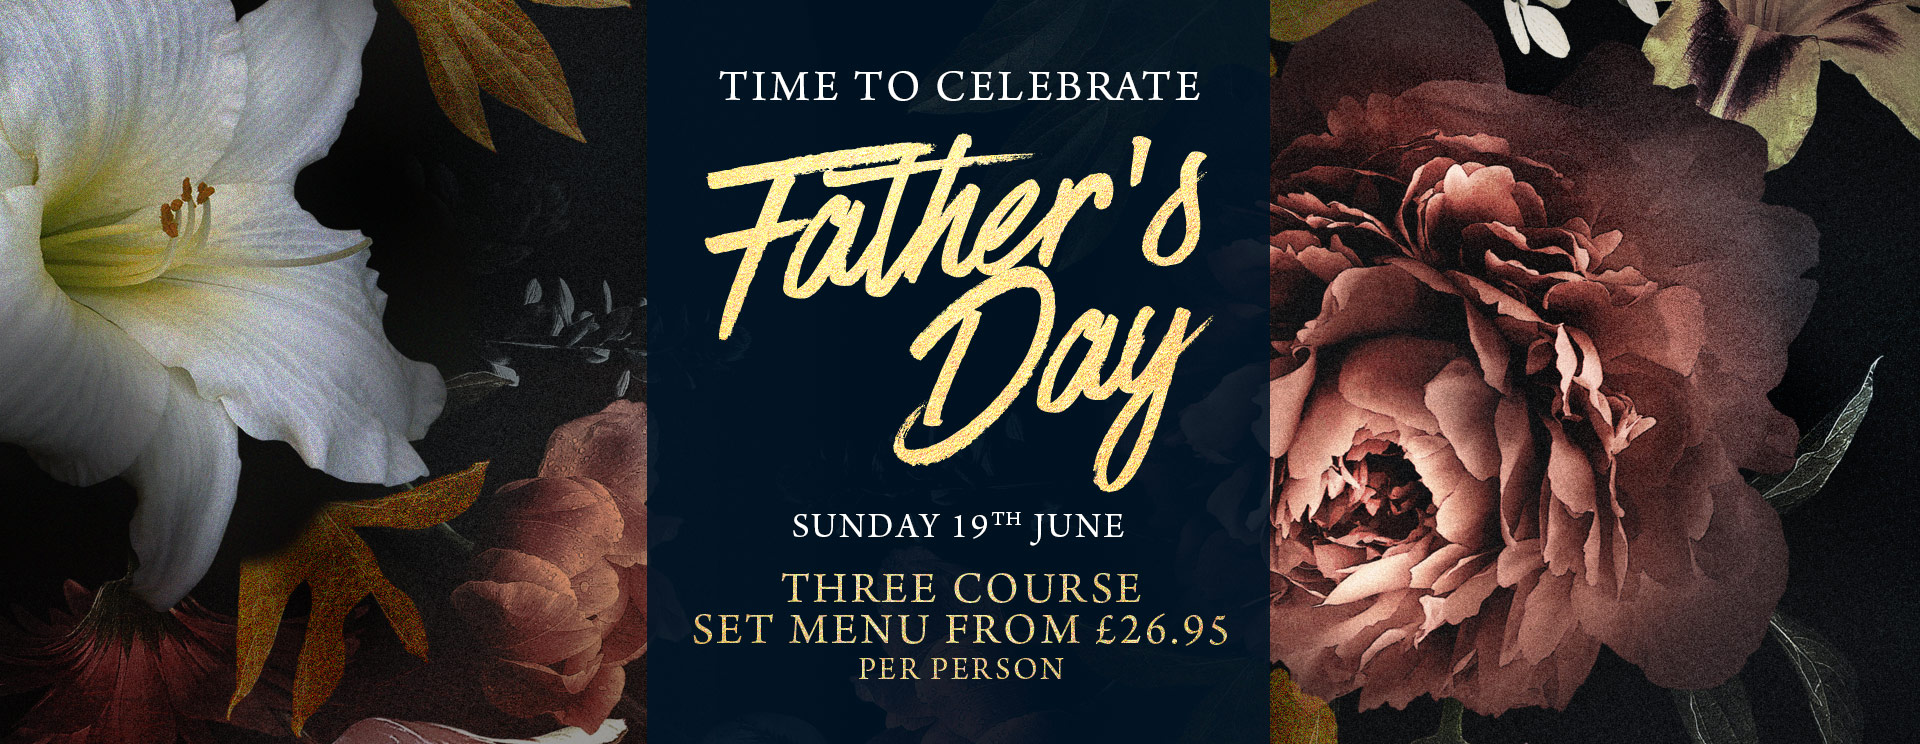 Fathers Day at The Nag's Head